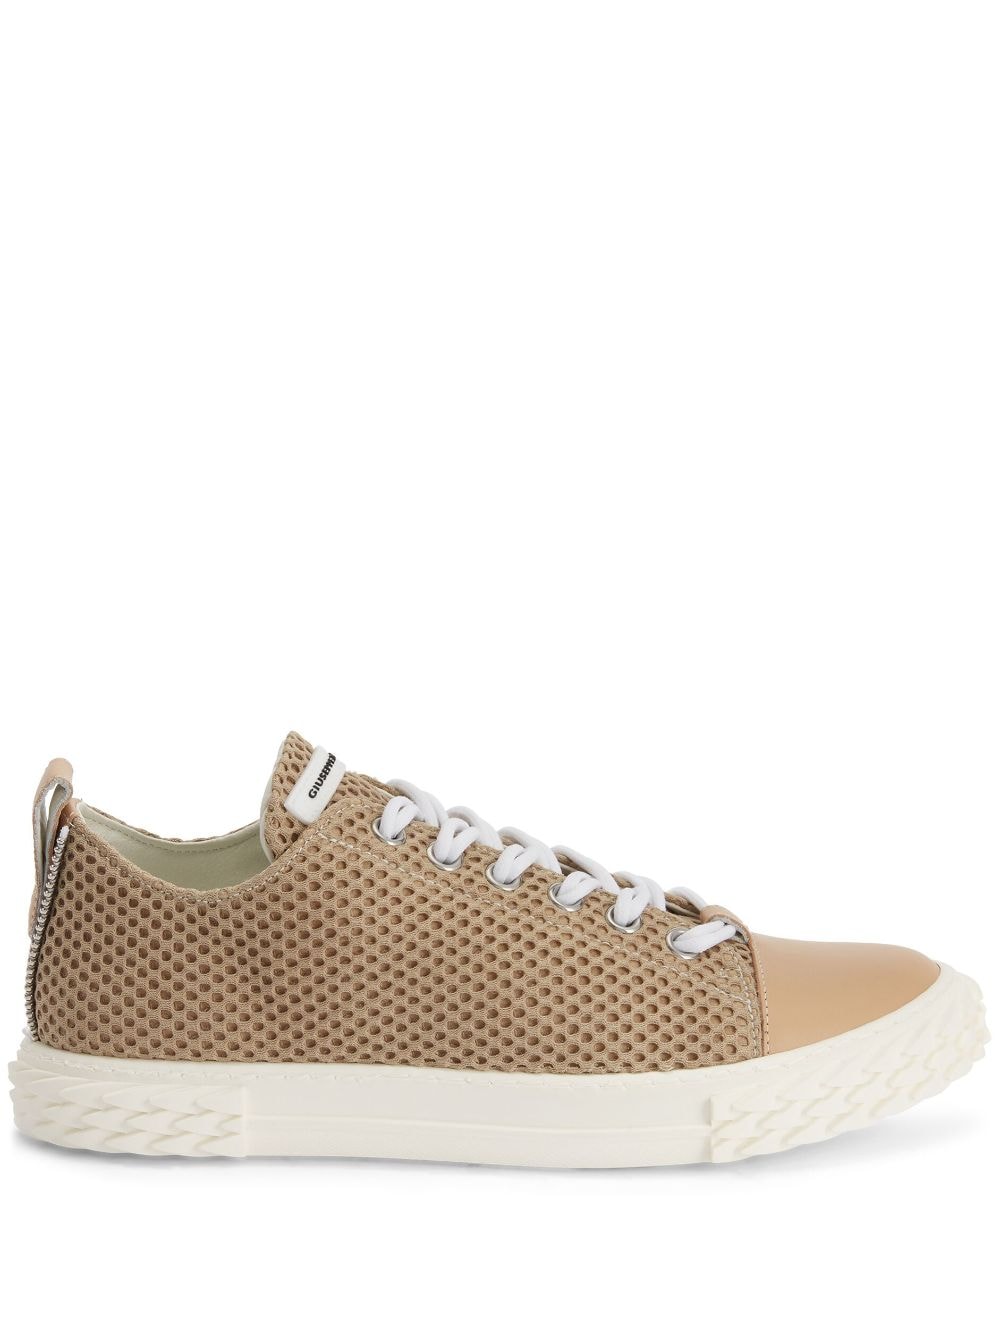 Frankie perforated leather sneakers